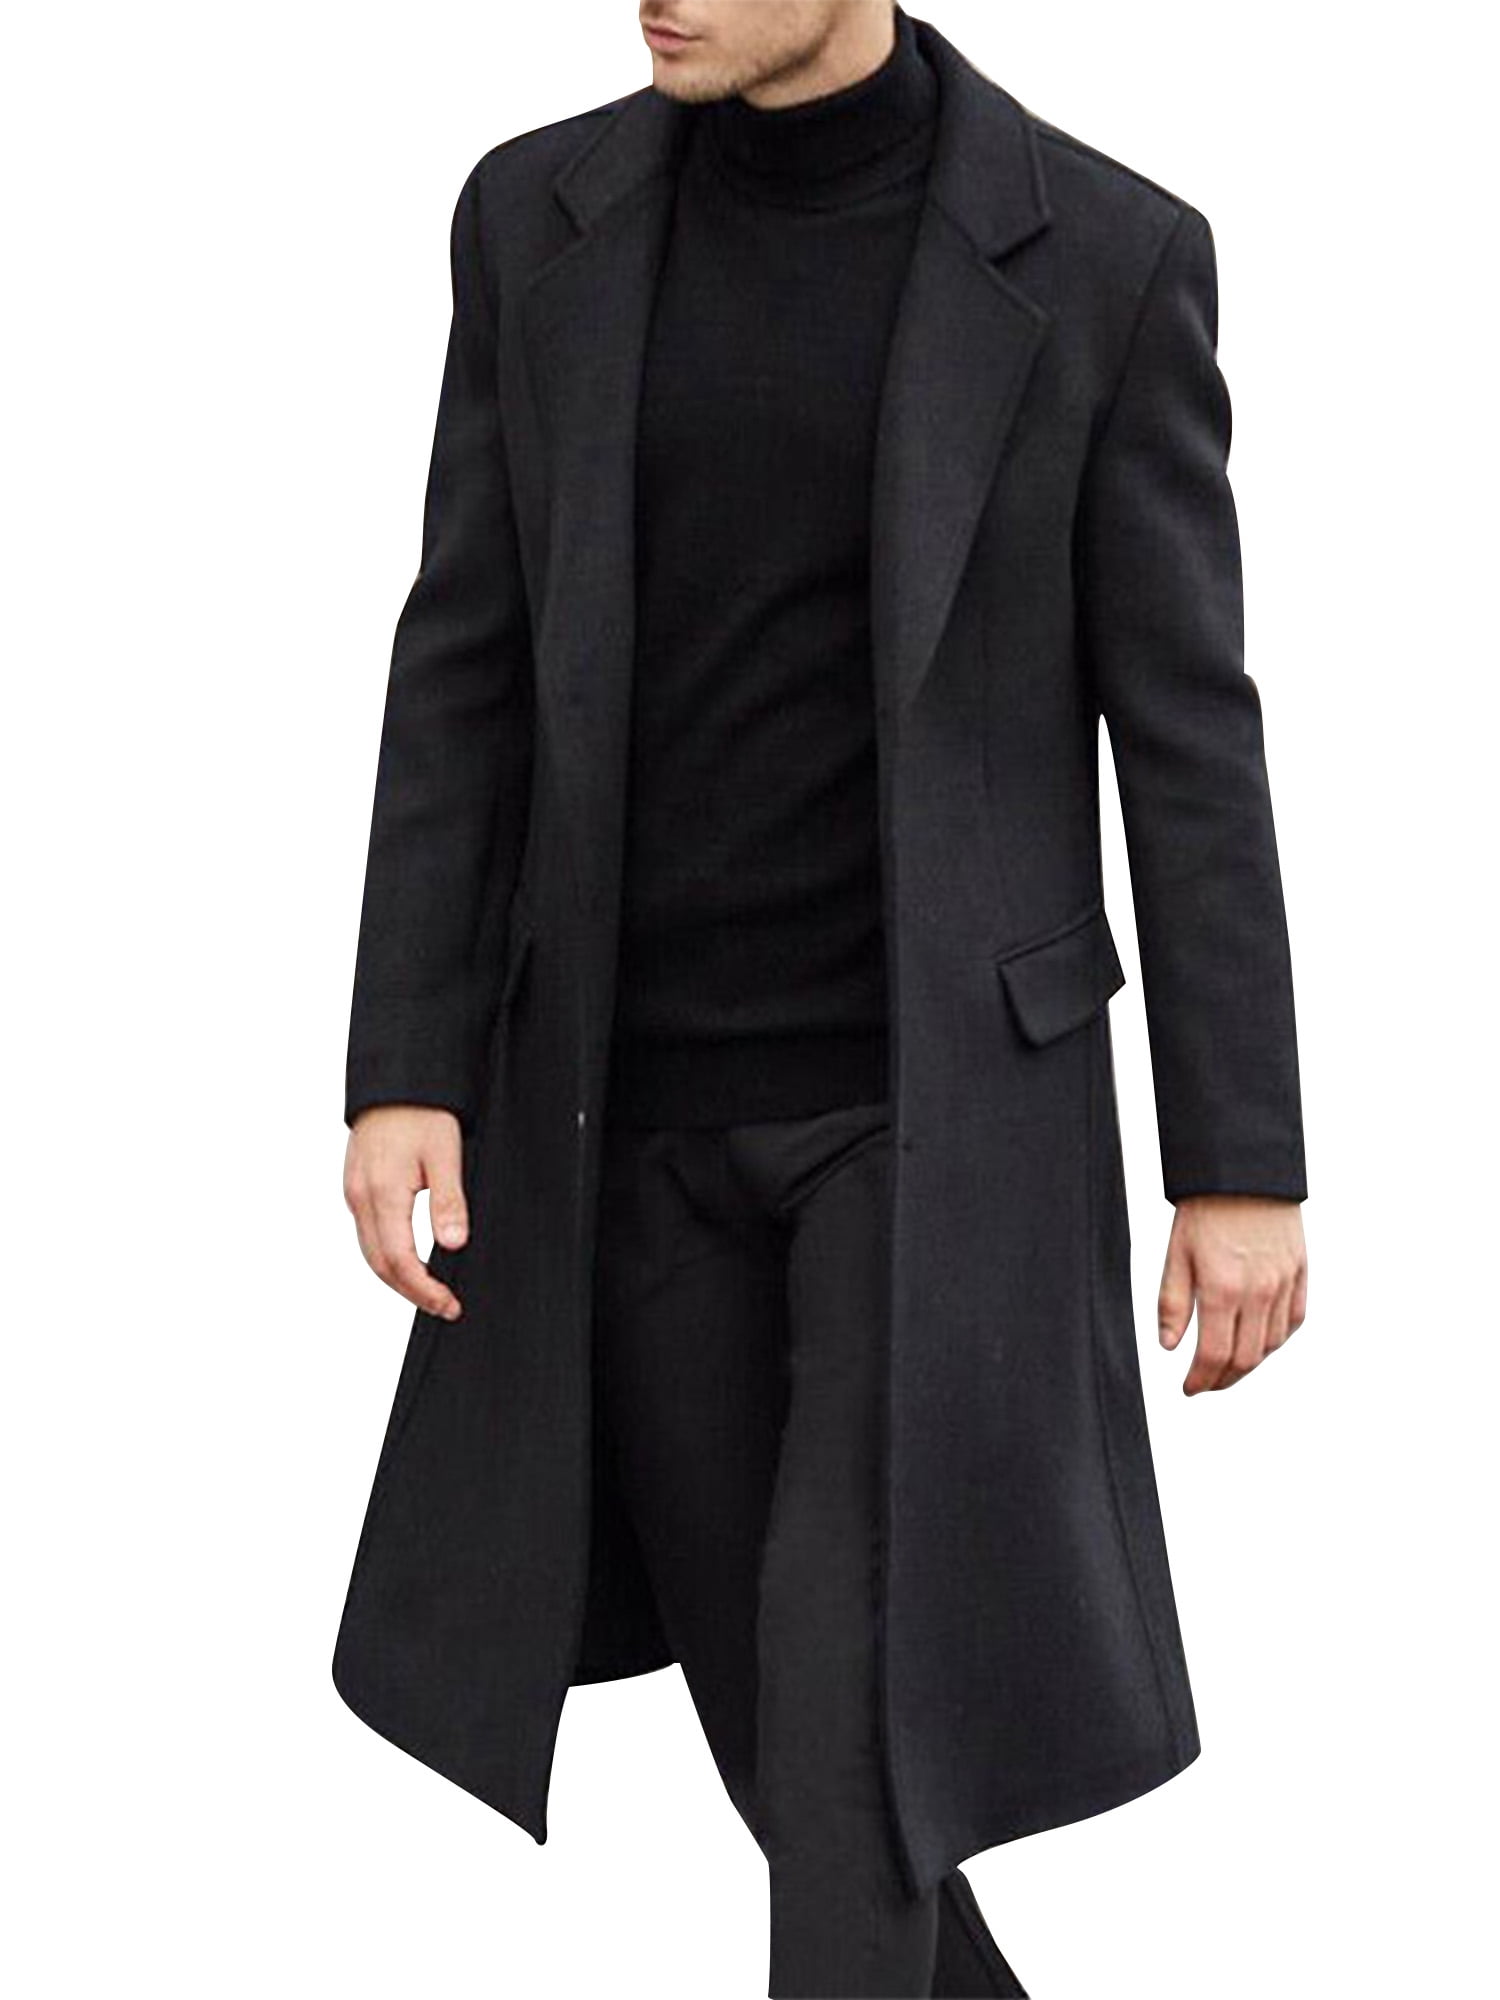 Men's Wool Trench Coat Winter Single/Double Breasted Slim Fit Overcoat 